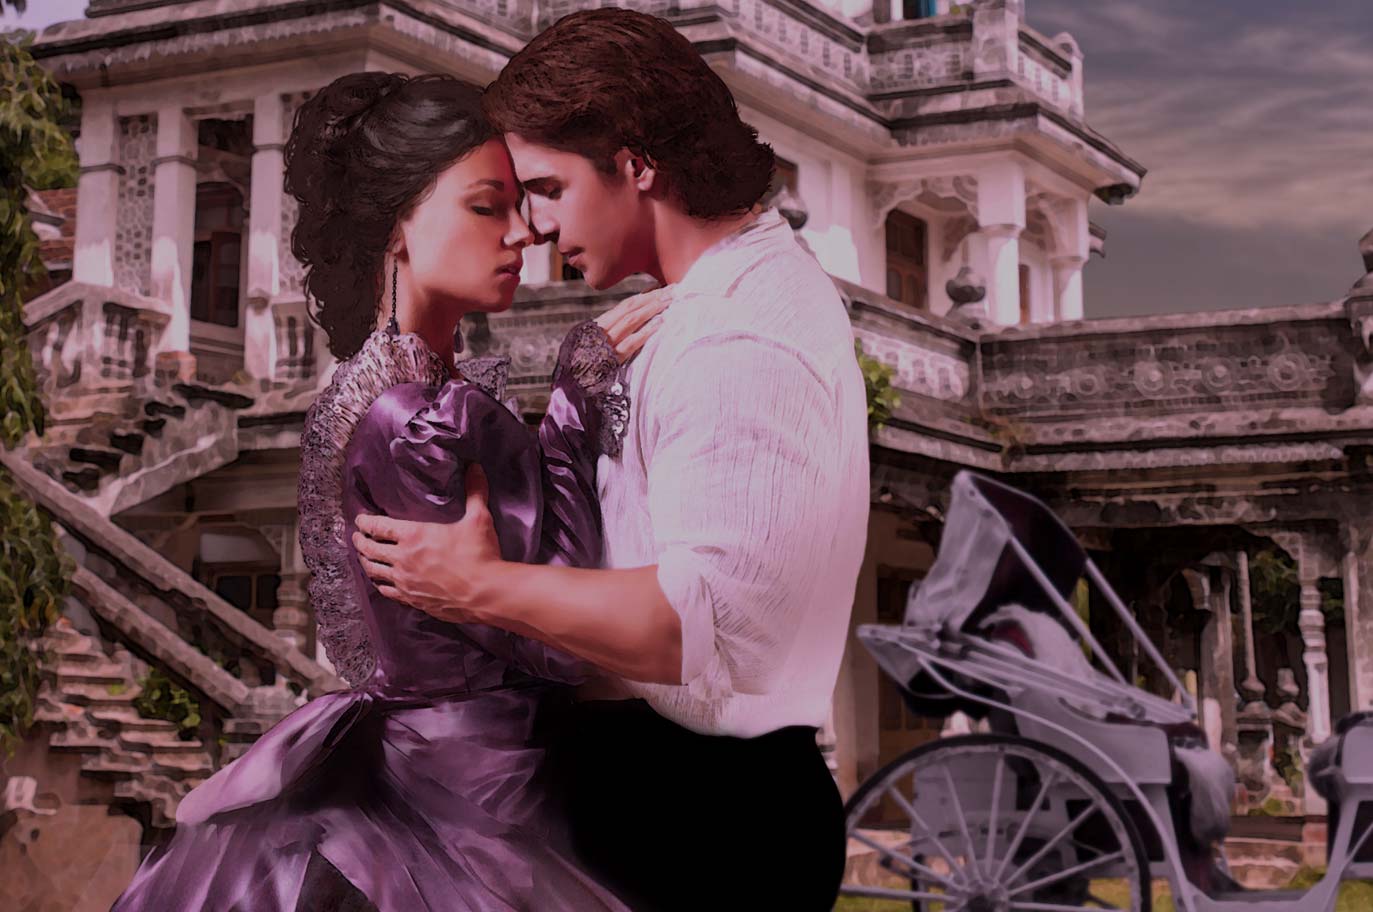 Sydney Jane Baily welcomes you to historical romance